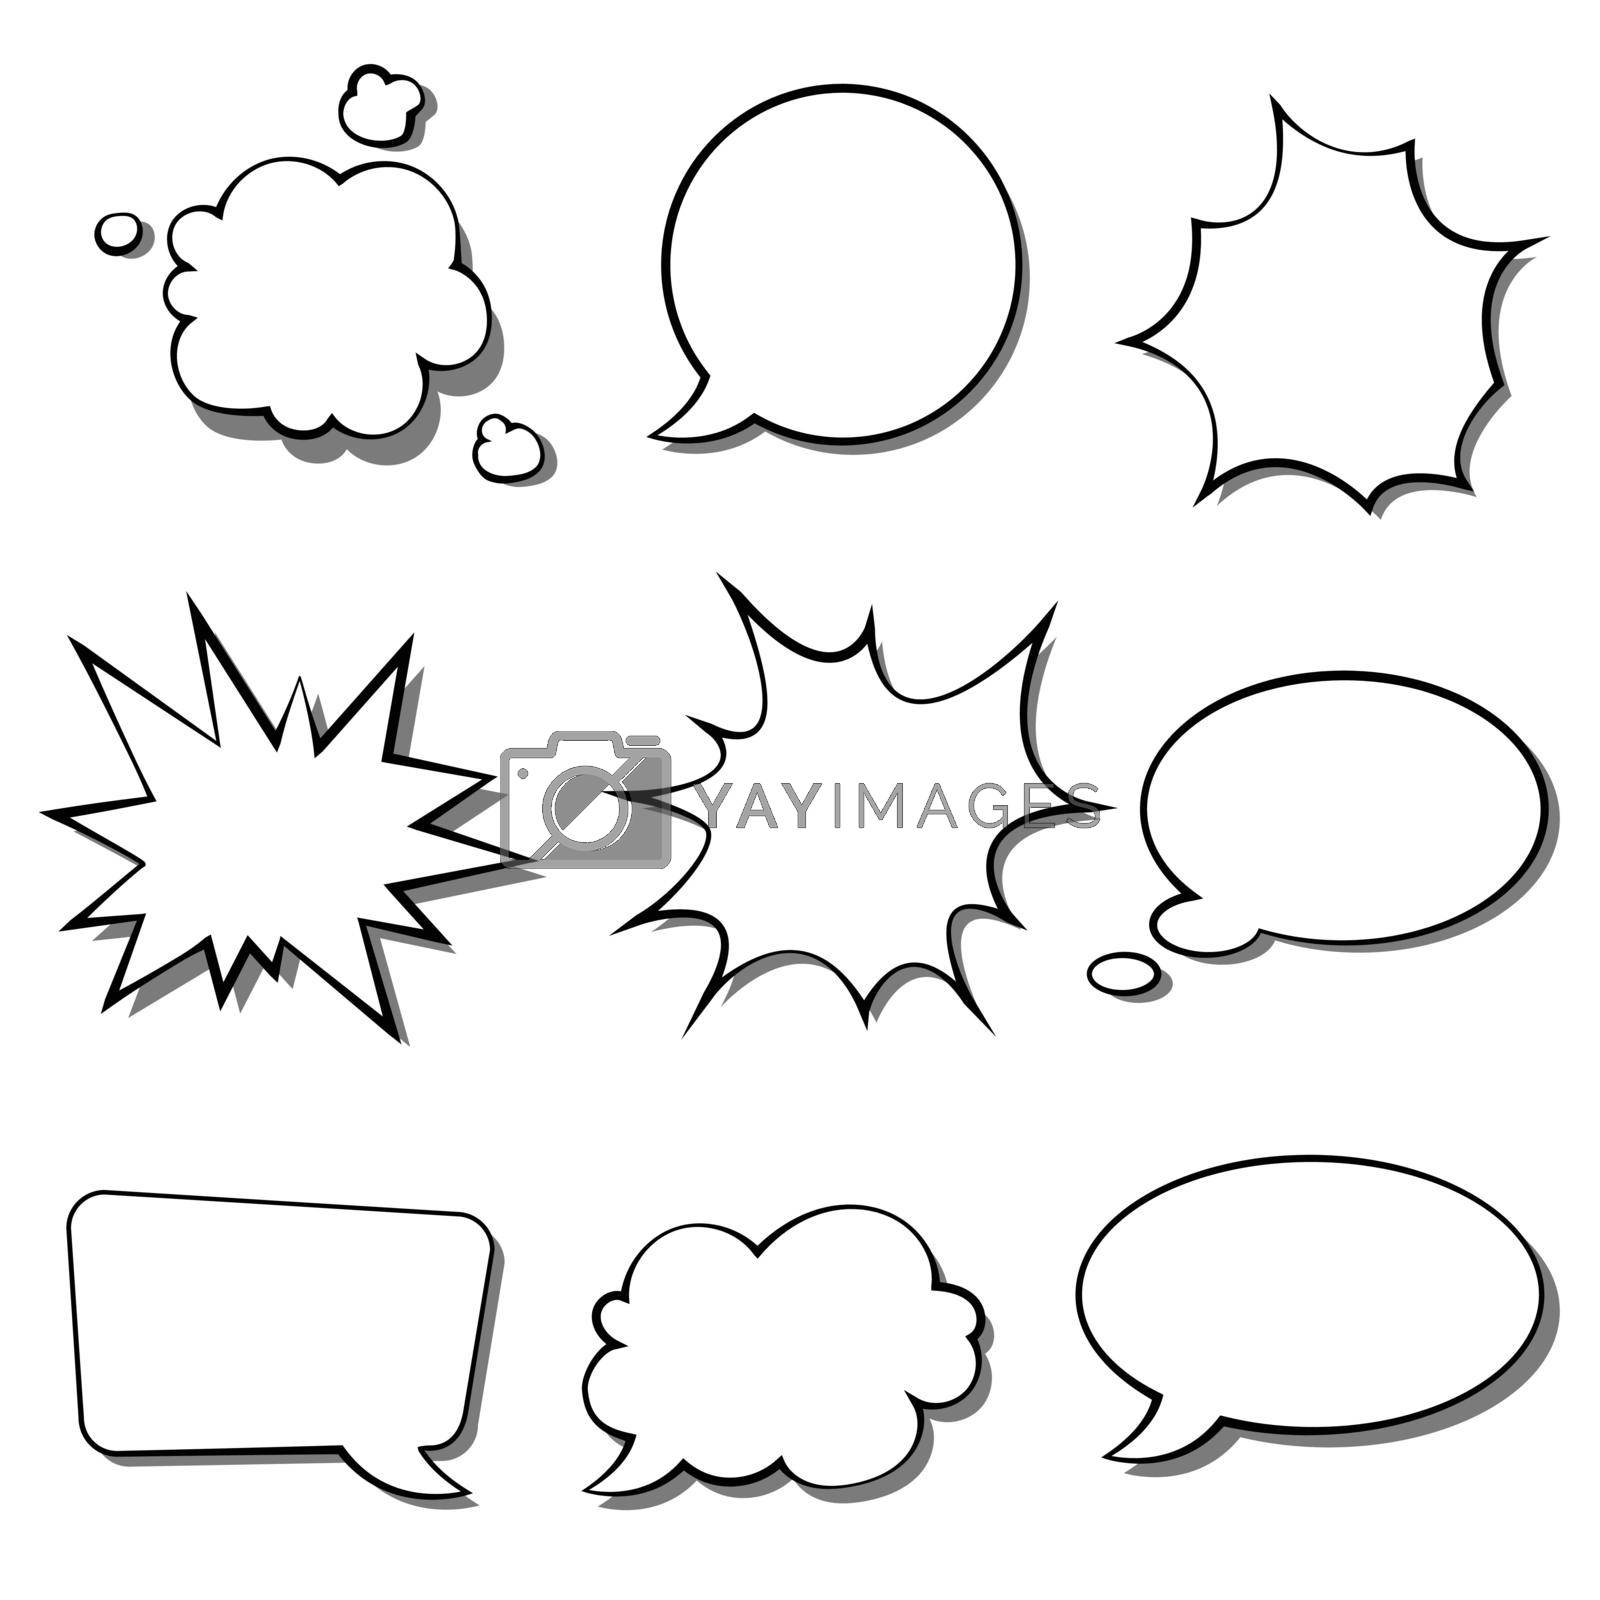 Royalty free image of Hand drawn speech bubble cartoon by valueinvestor